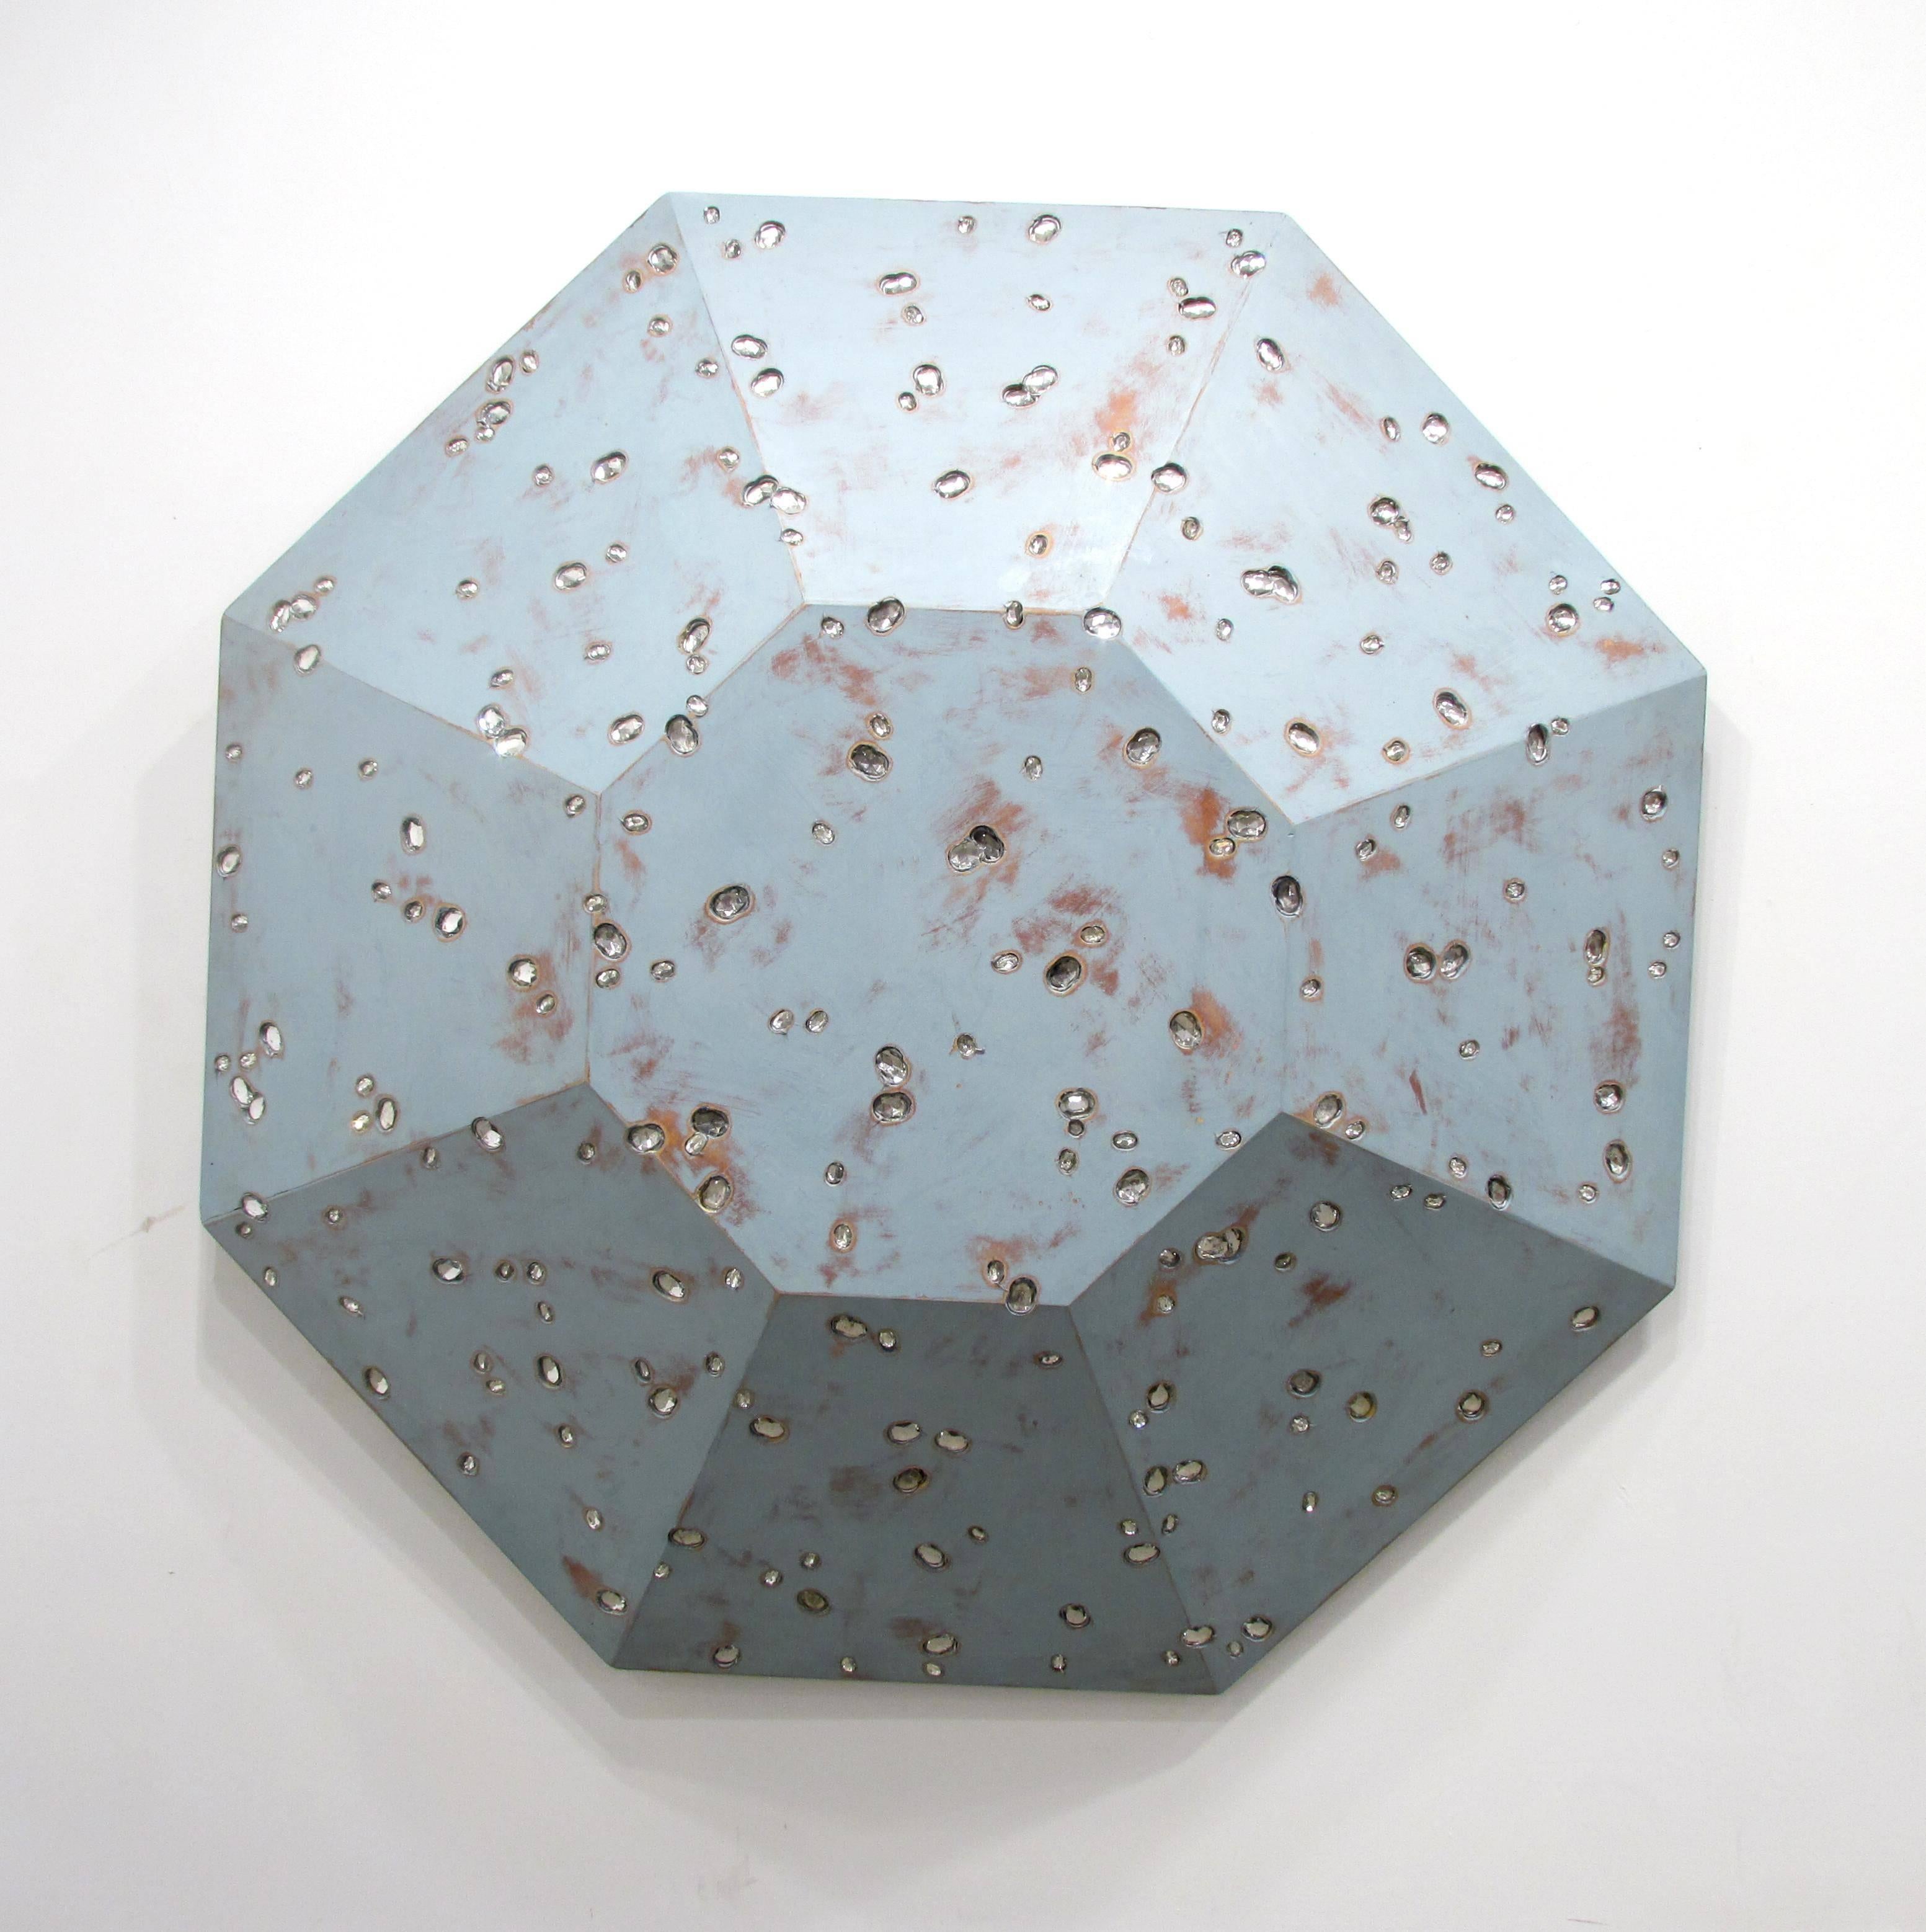 Large diamond shaped 3D wall-mounted sculpture with inlaid glass jewels by John Torreano titled 